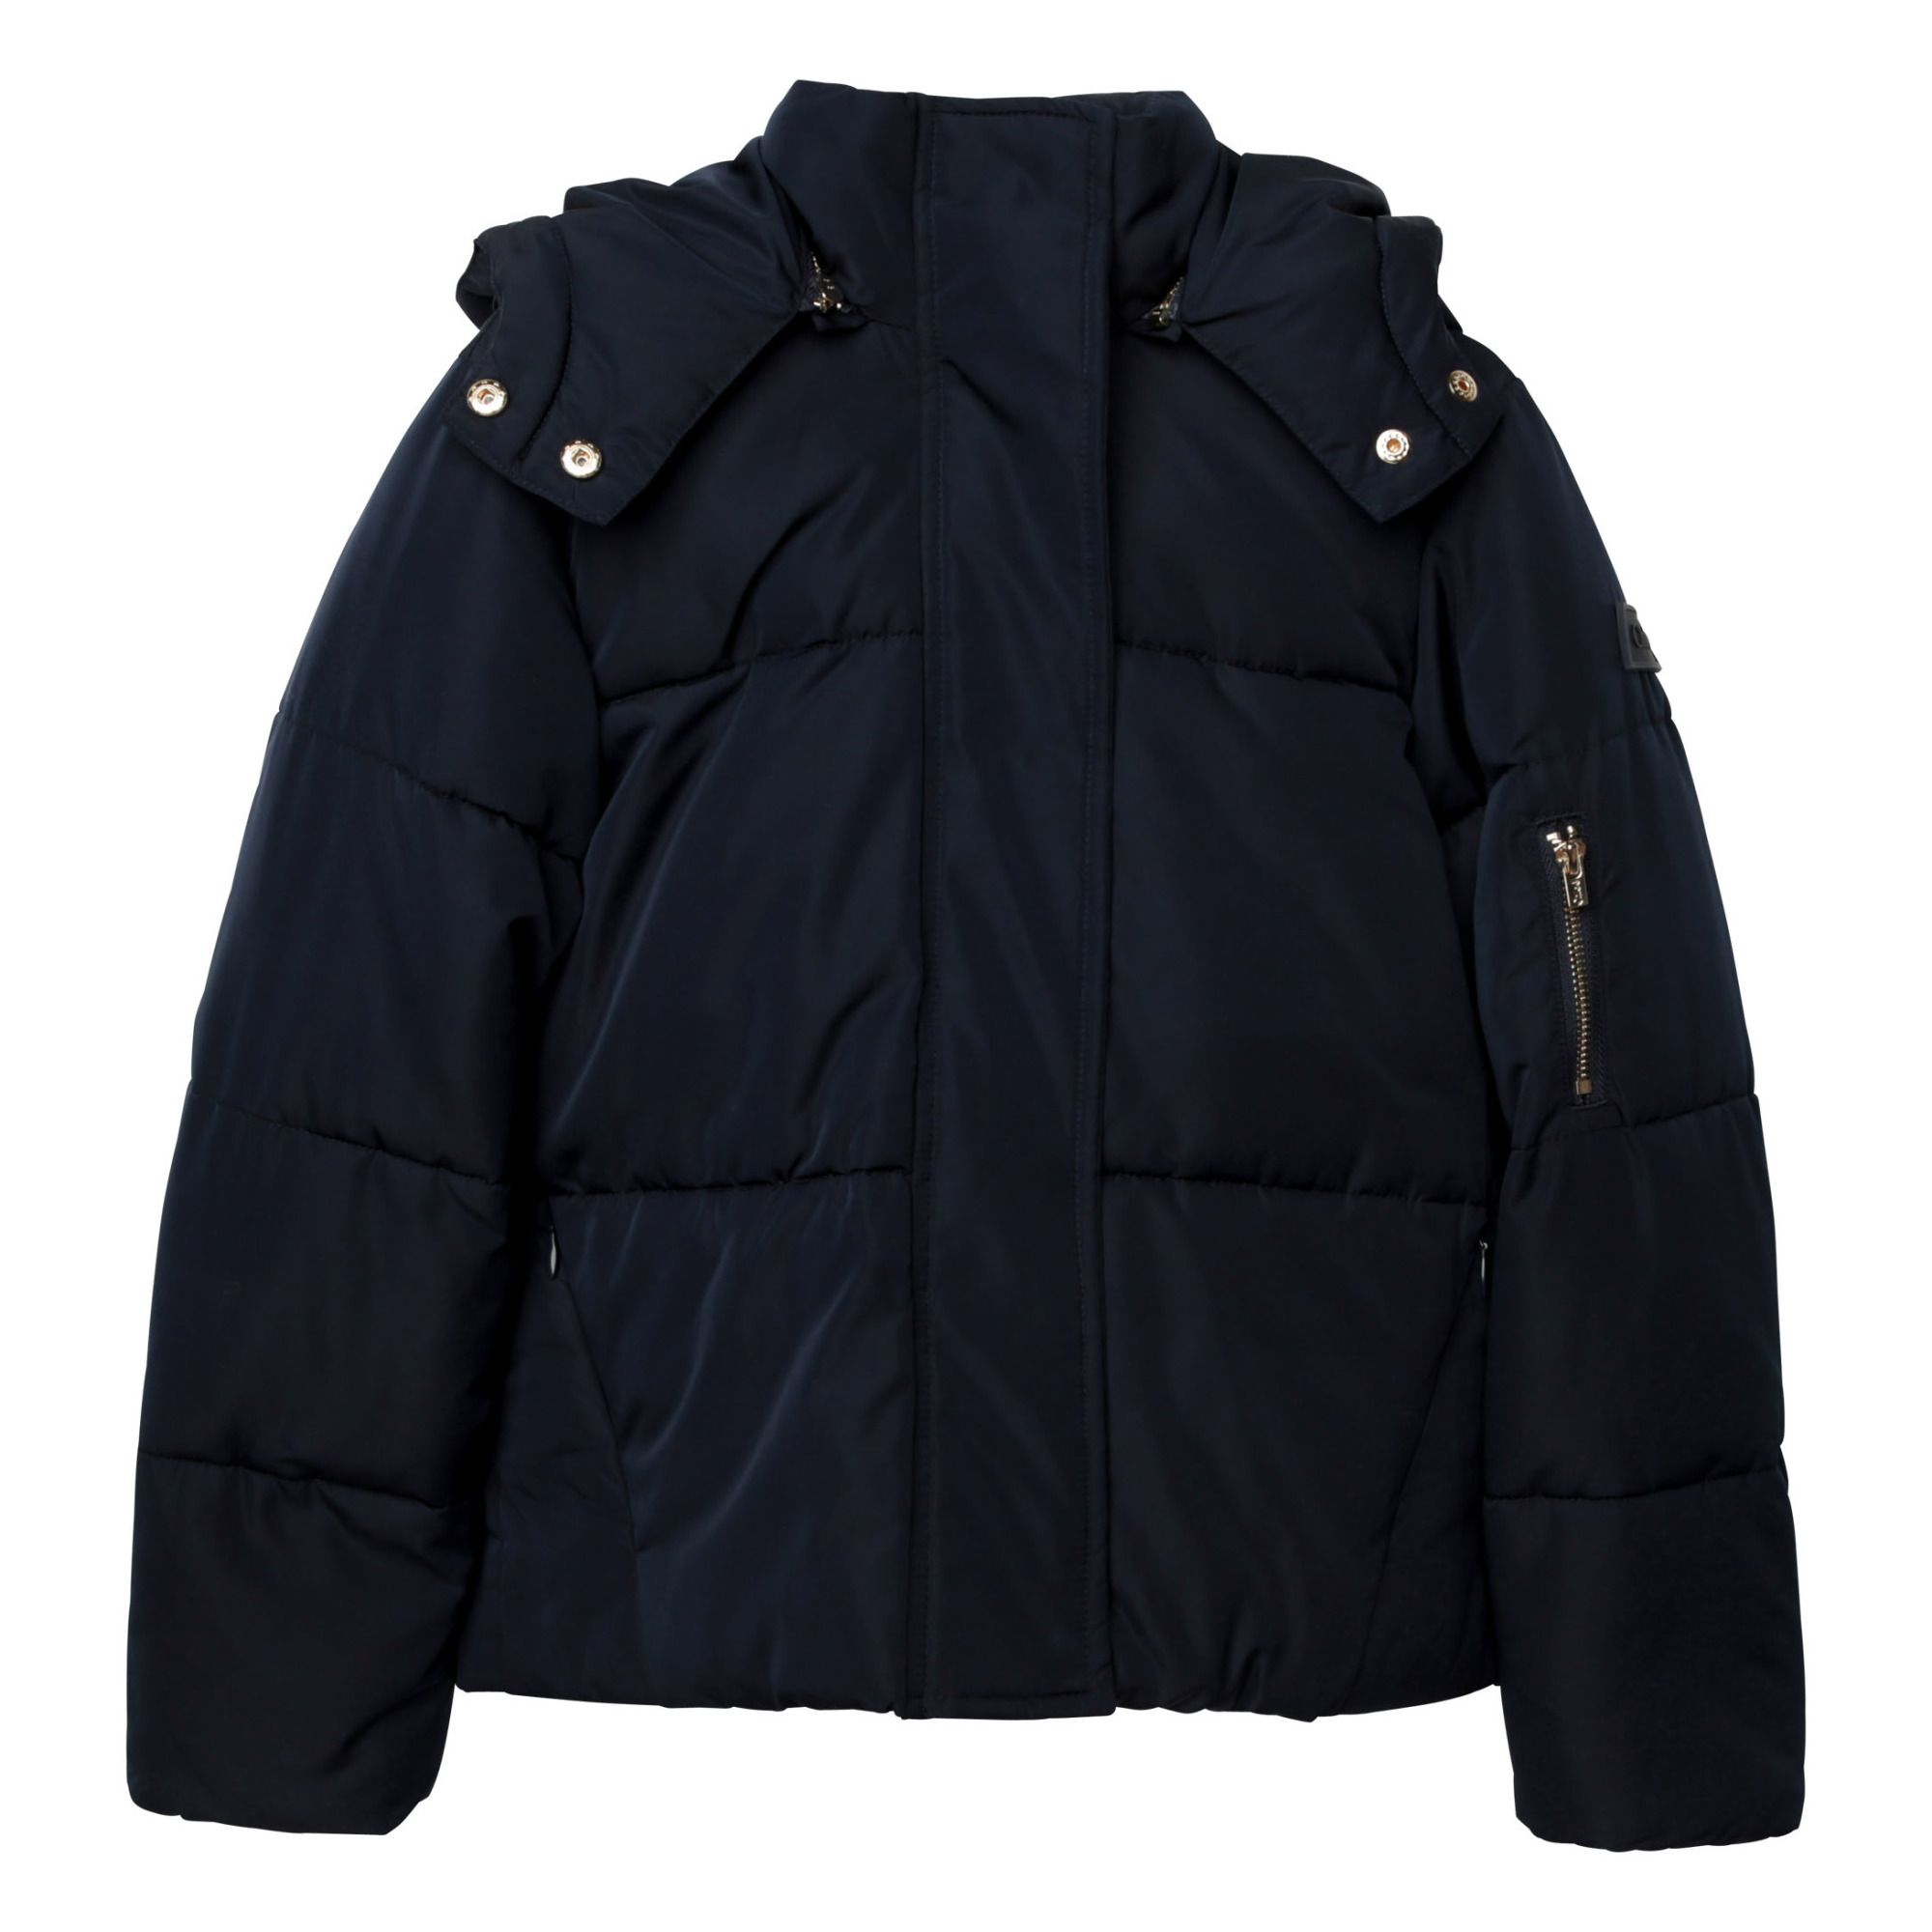 Superdry Hooded Ripstop Puffer Jacket Women's Womens, 45% OFF